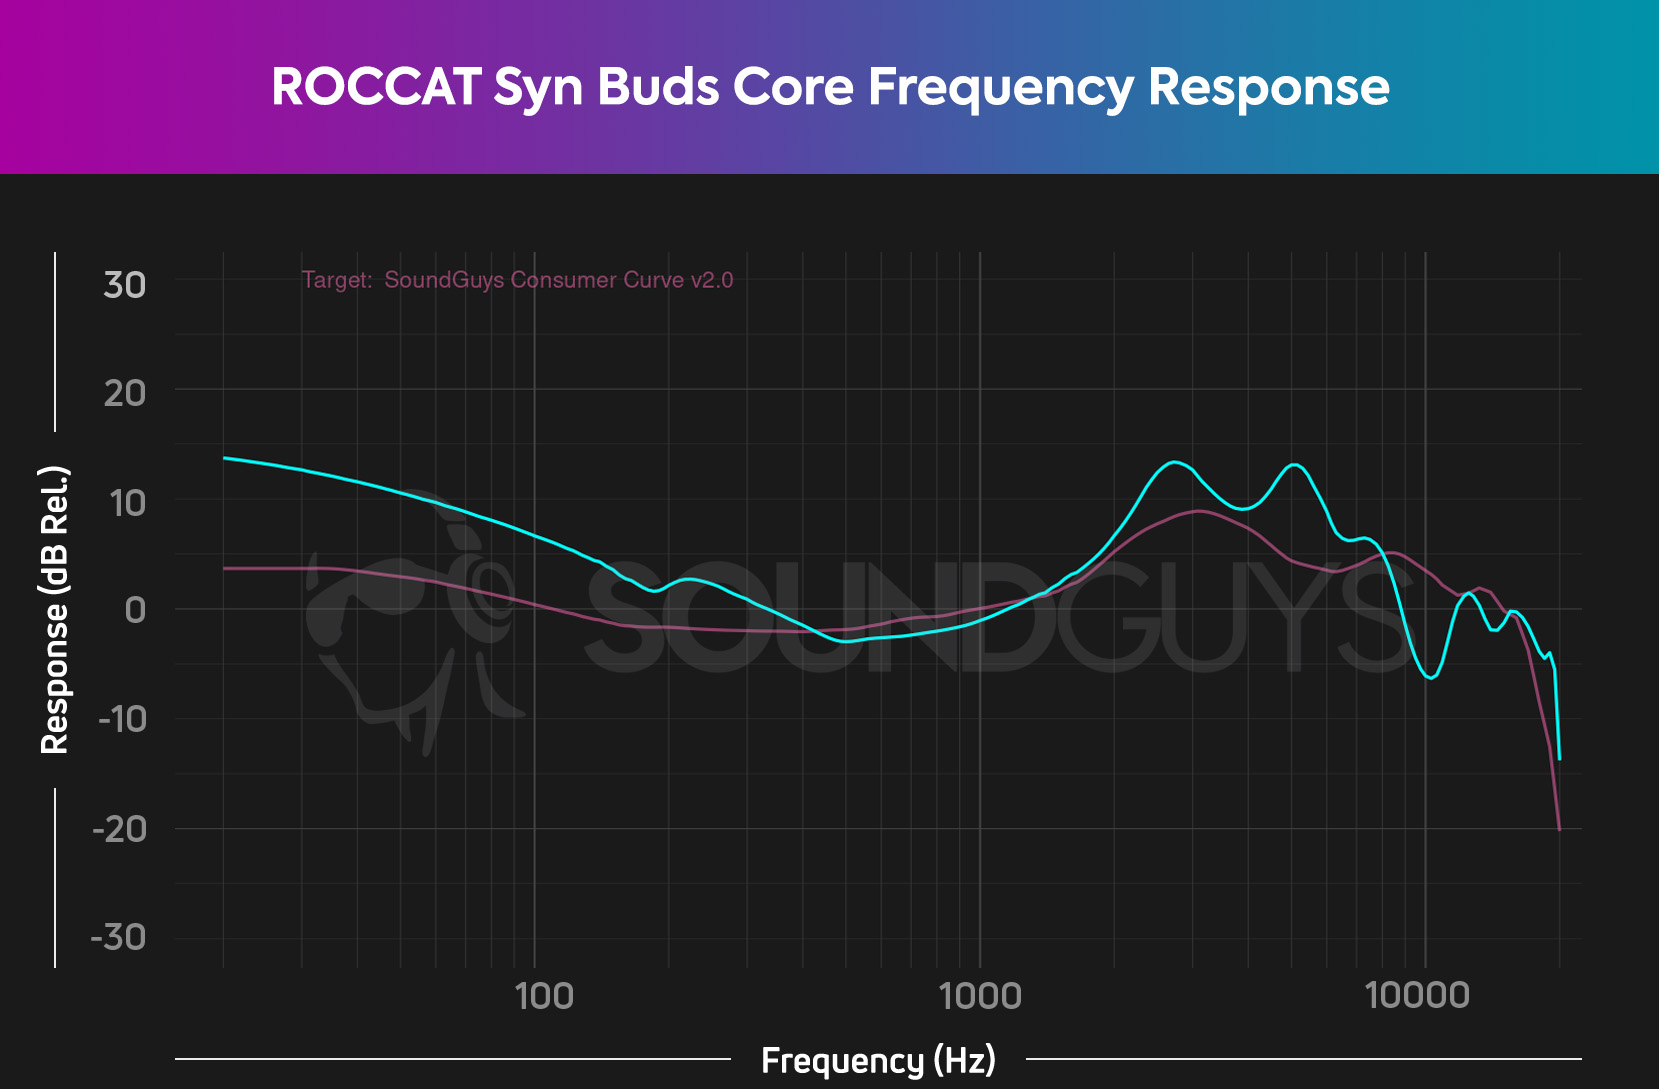 The frequency response chart for the ROCCAT Syn Buds Core.